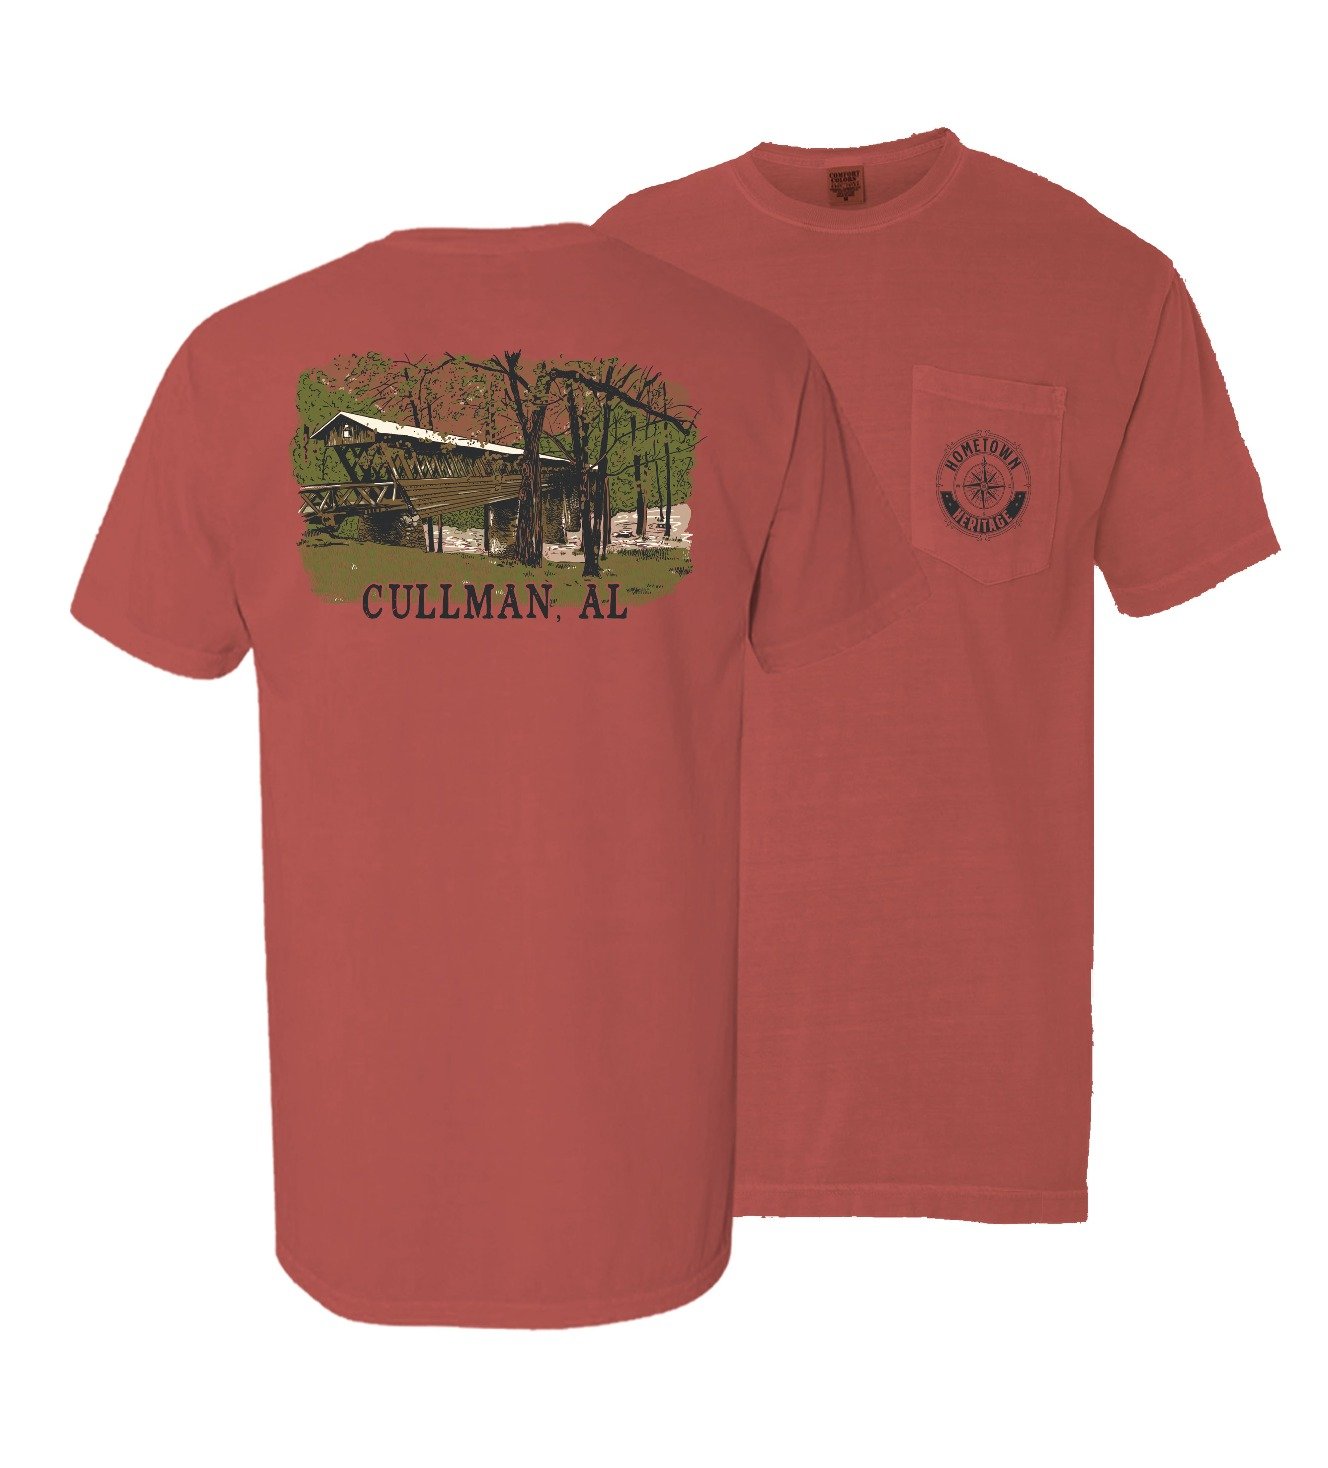 Cullman, AL Clarkson Covered Bridge T-Shirt by Hometown Heritage